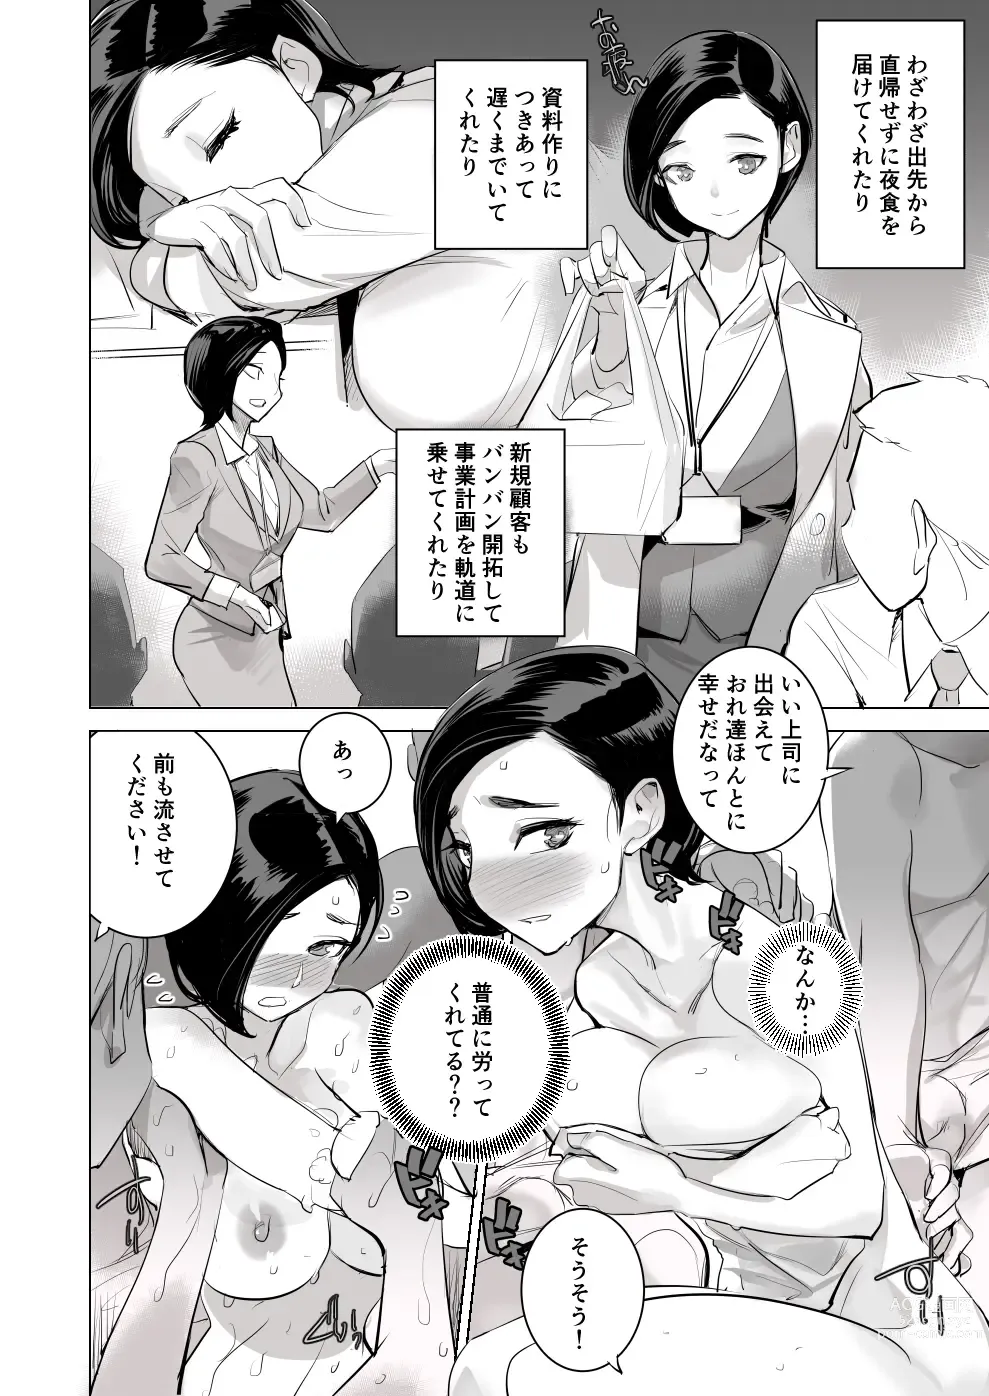 Page 15 of doujinshi Section Leader